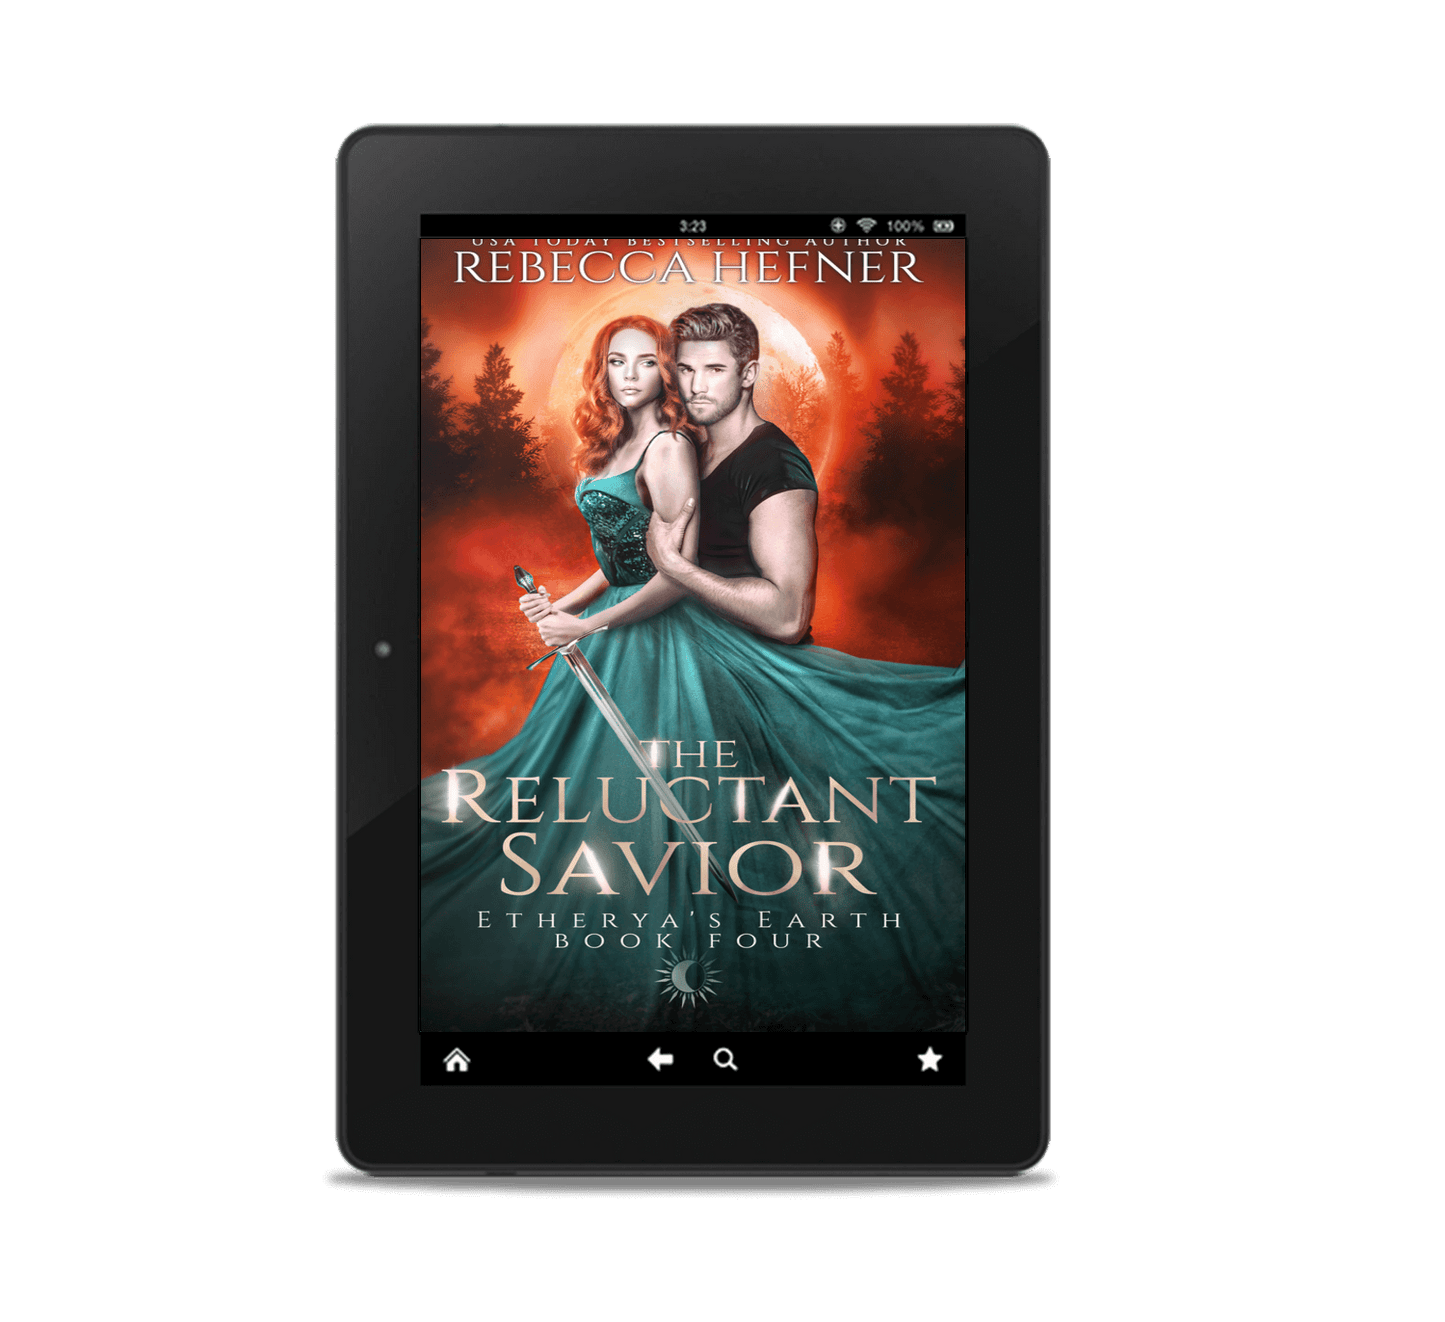 The Reluctant Savior (Etherya's Earth #4)